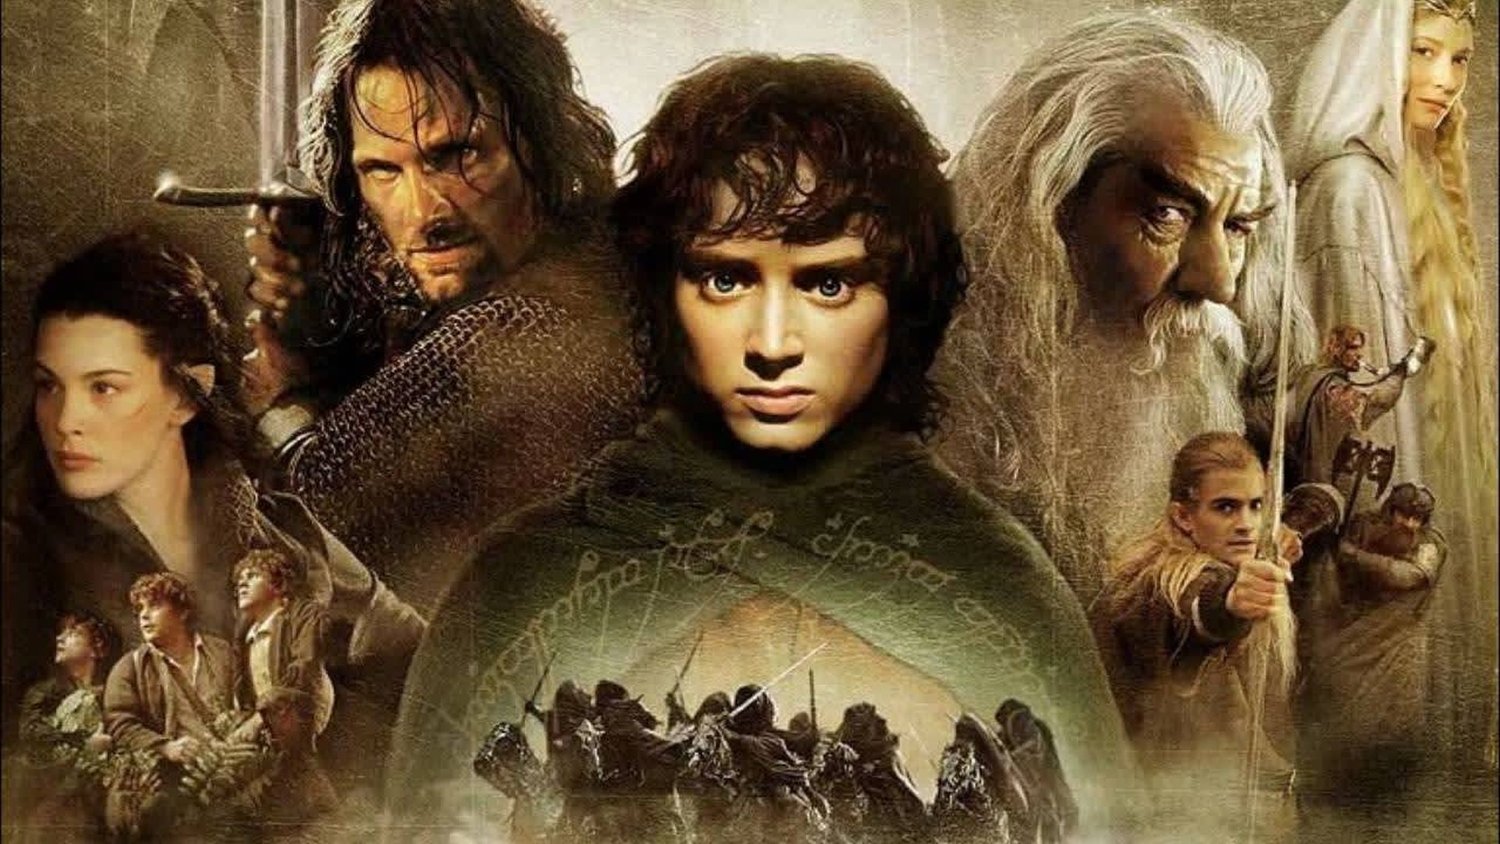 Museum Of Moving Image Theatrically Releasing Directors Cuts/Extended Versions Of 16 Movies Including LORD OF THE RINGS